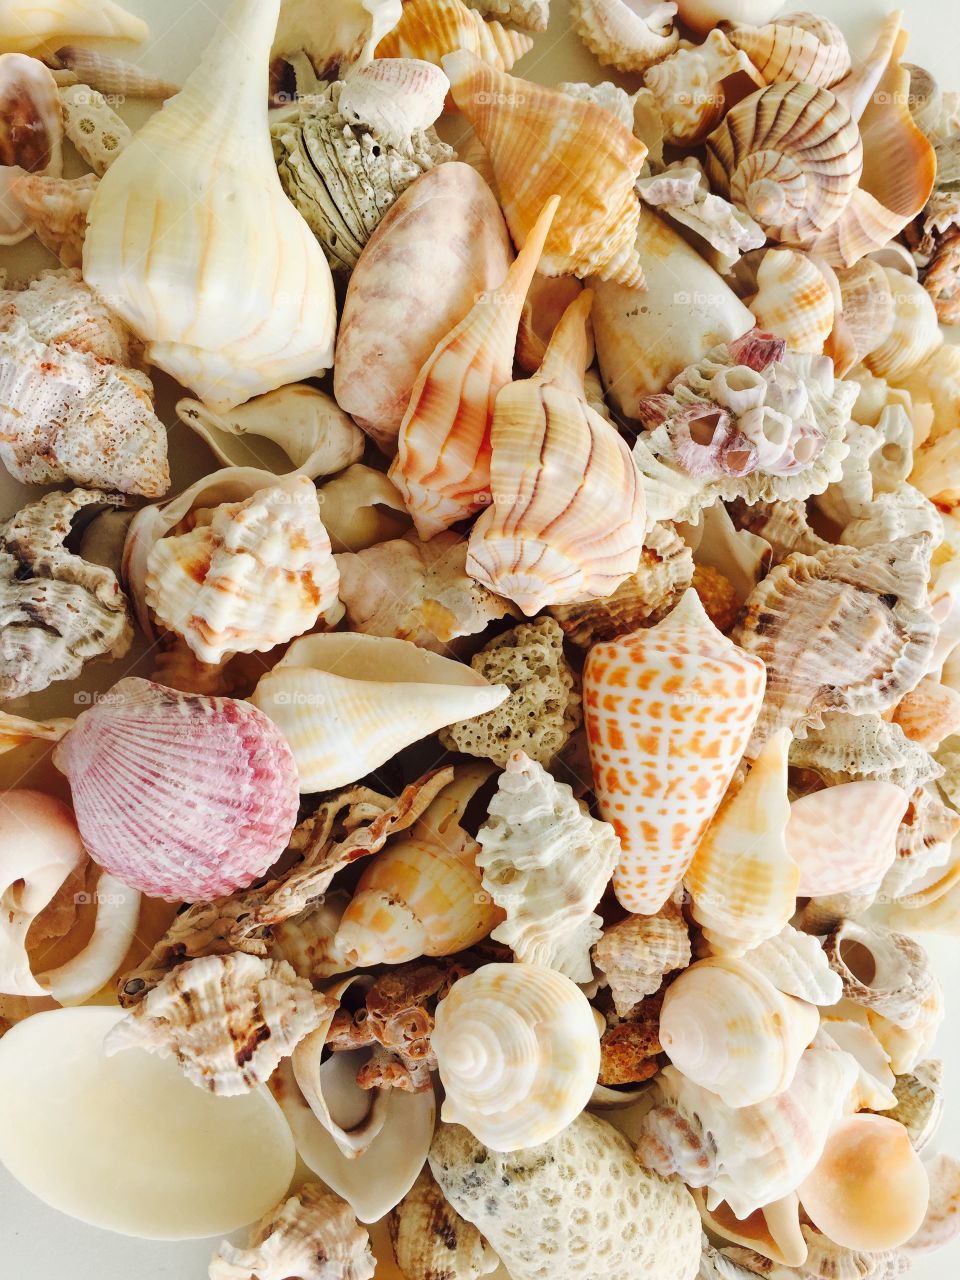 Elevated view of seashells collection